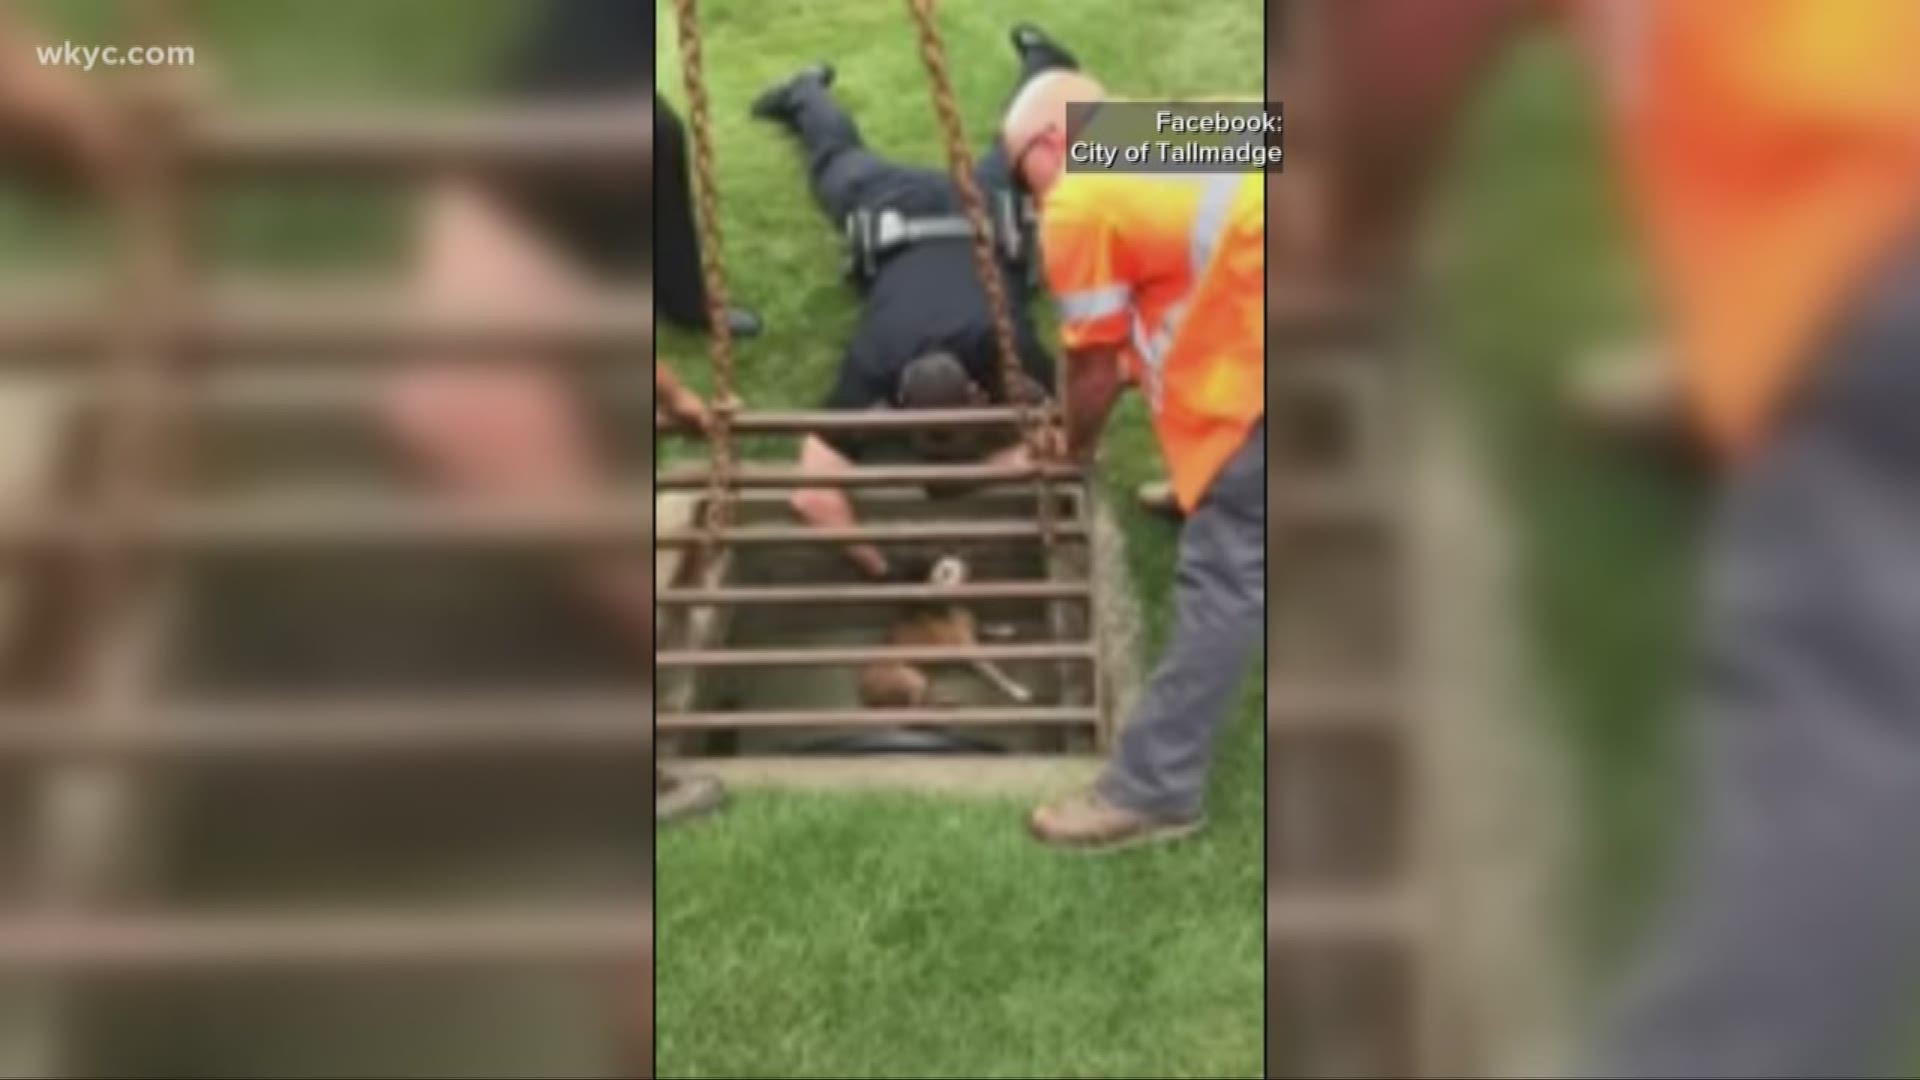 Rescuers used a chain to lift the grate, they gave the pup a few treats before pulling him up to safety. Police say the dog was reunited with his owner.